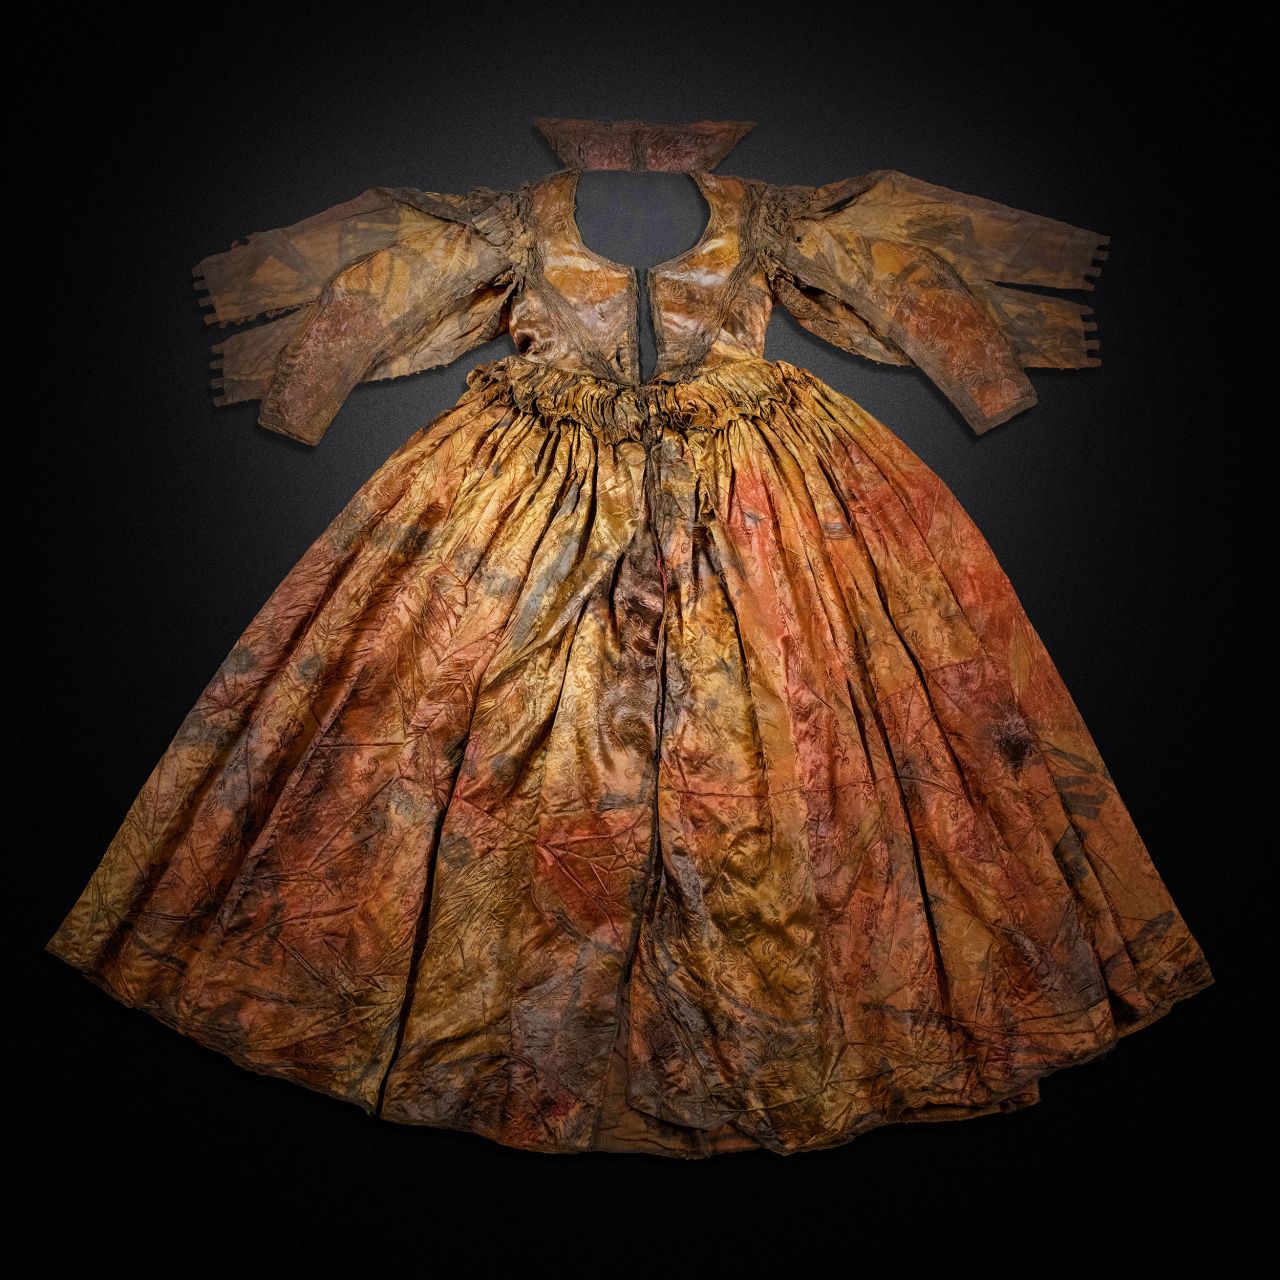 The Palmwood Wreck, a Dutch merchant ship that wrecked off the coast of Texel in 1660, was full of luxury goods. Divers retrieved them, and after years of study, the finds are on display at the Netherlands' Museum Kaap Skil. One of the most striking discoveries was a virtually intact silk satin dress with a woven floral motif.